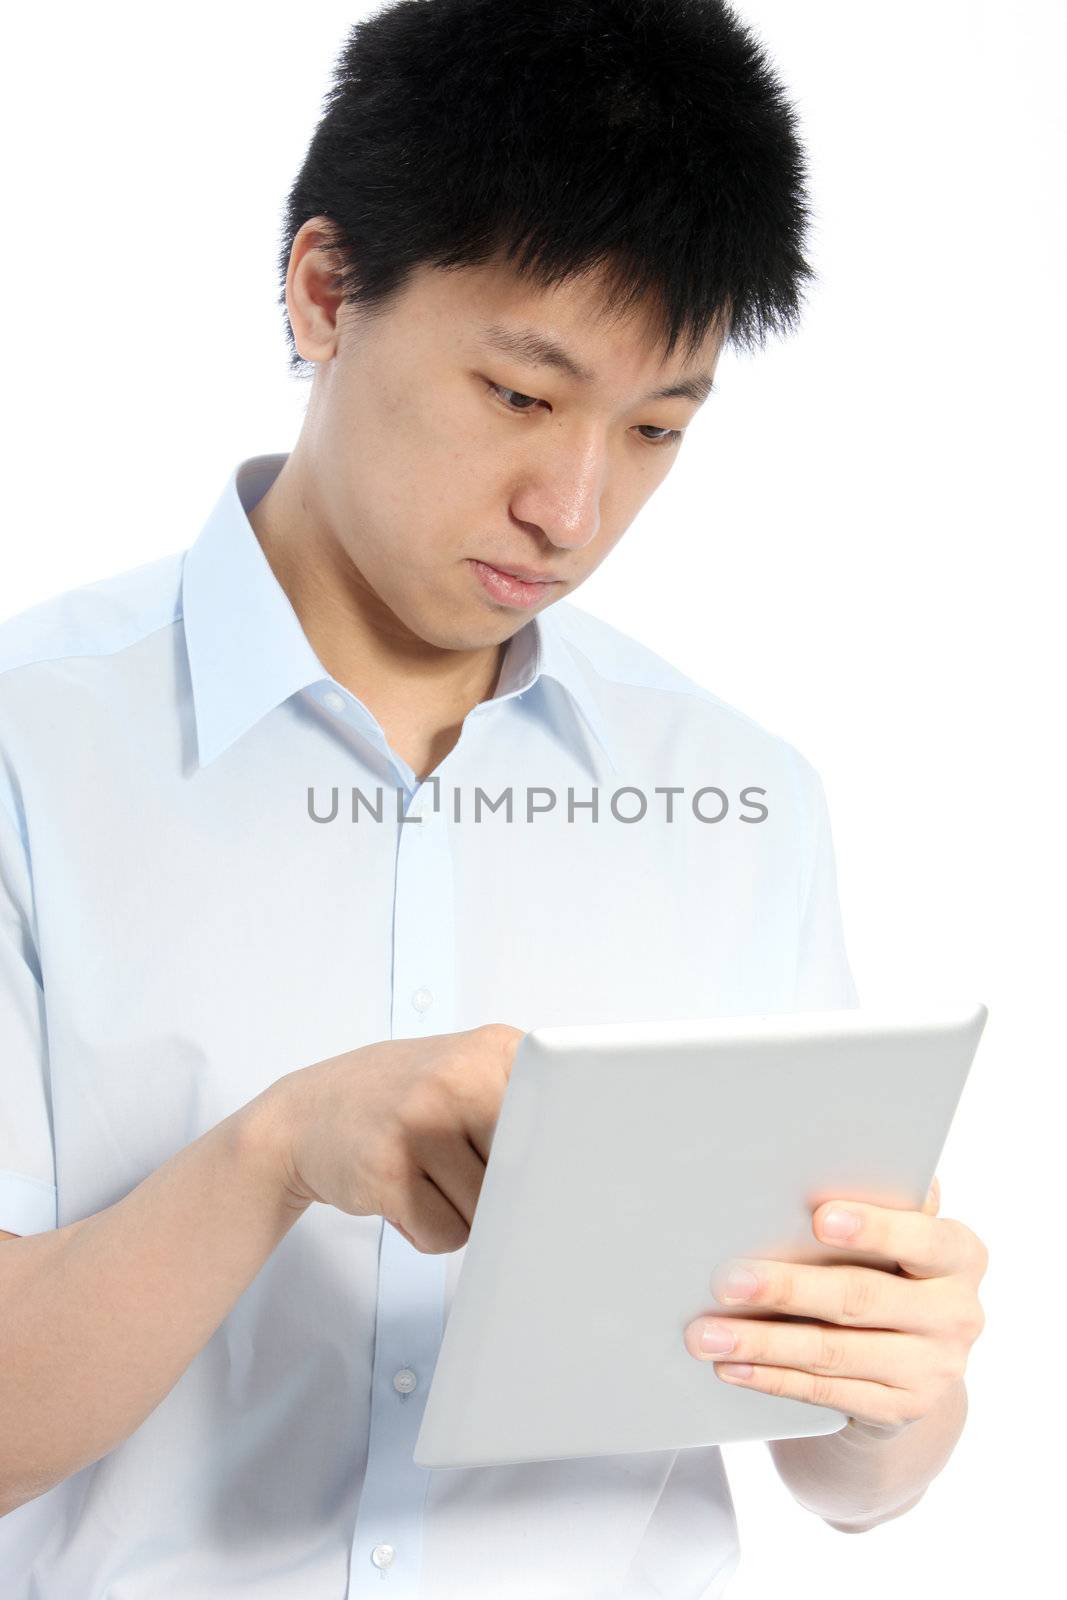 Portrait of a man searching on his tablet against the white background